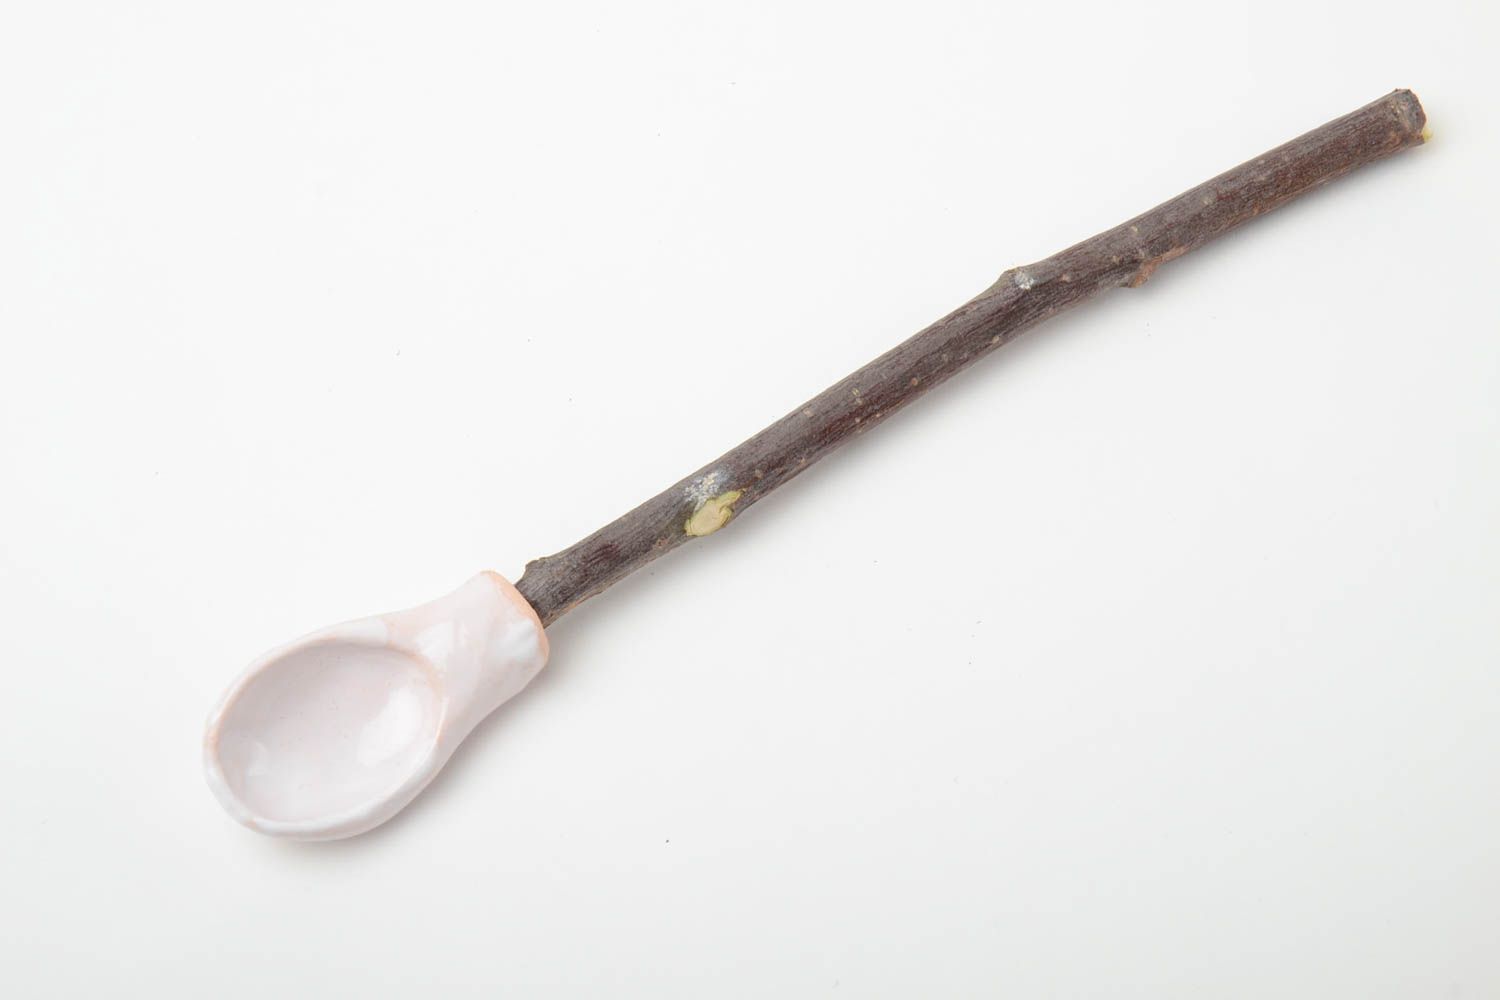 Beautiful handmade white clay spoon with apricot wood handle photo 2